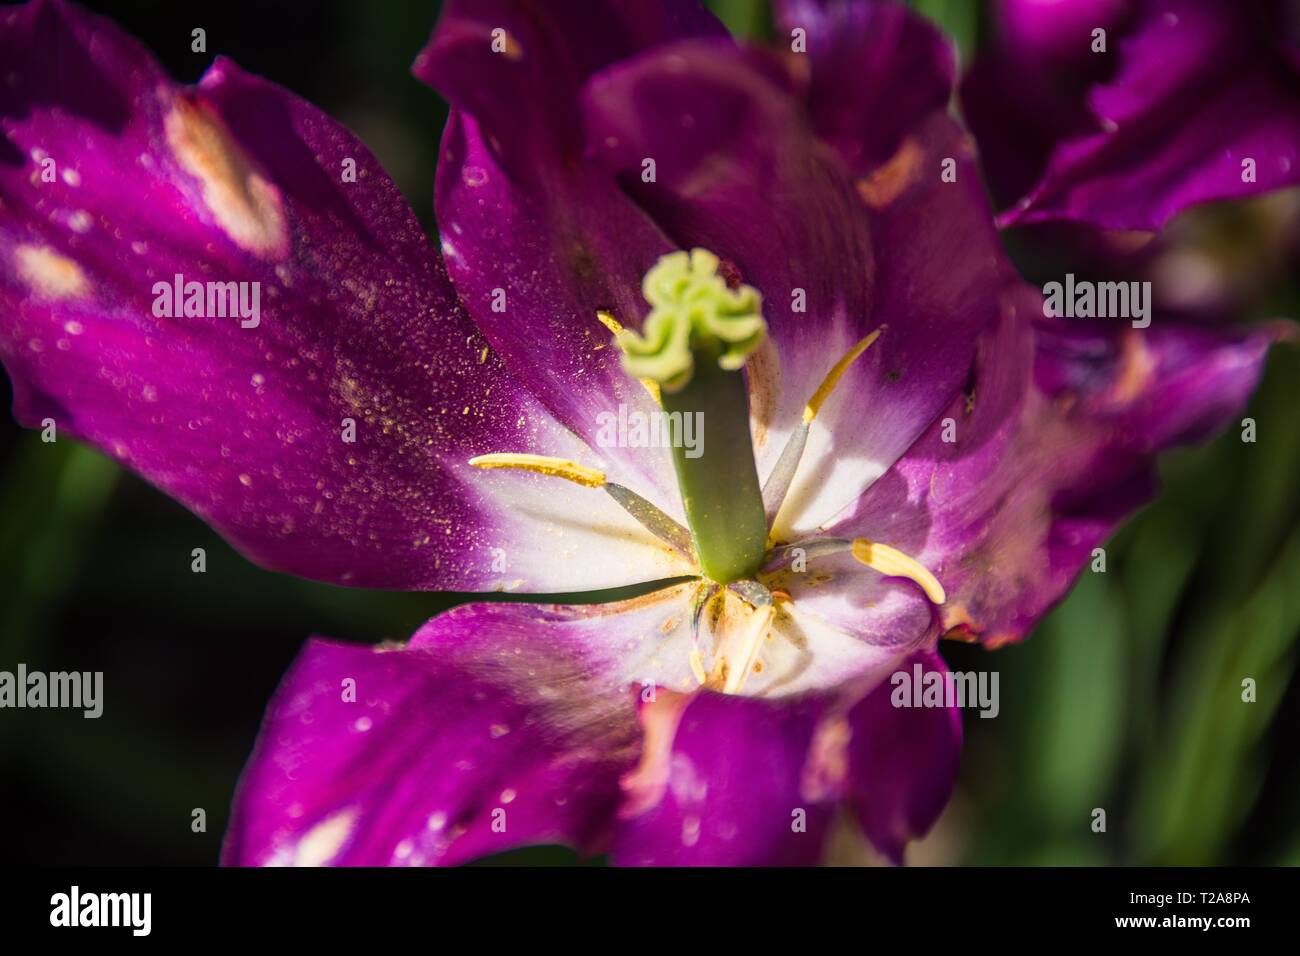 Closeup of an open purple Parrot Tulip with scattered pollen grains reveals its 6 stamens and 3-lobed ovary, terminated by a sessile 3-lobed stigma. Stock Photo